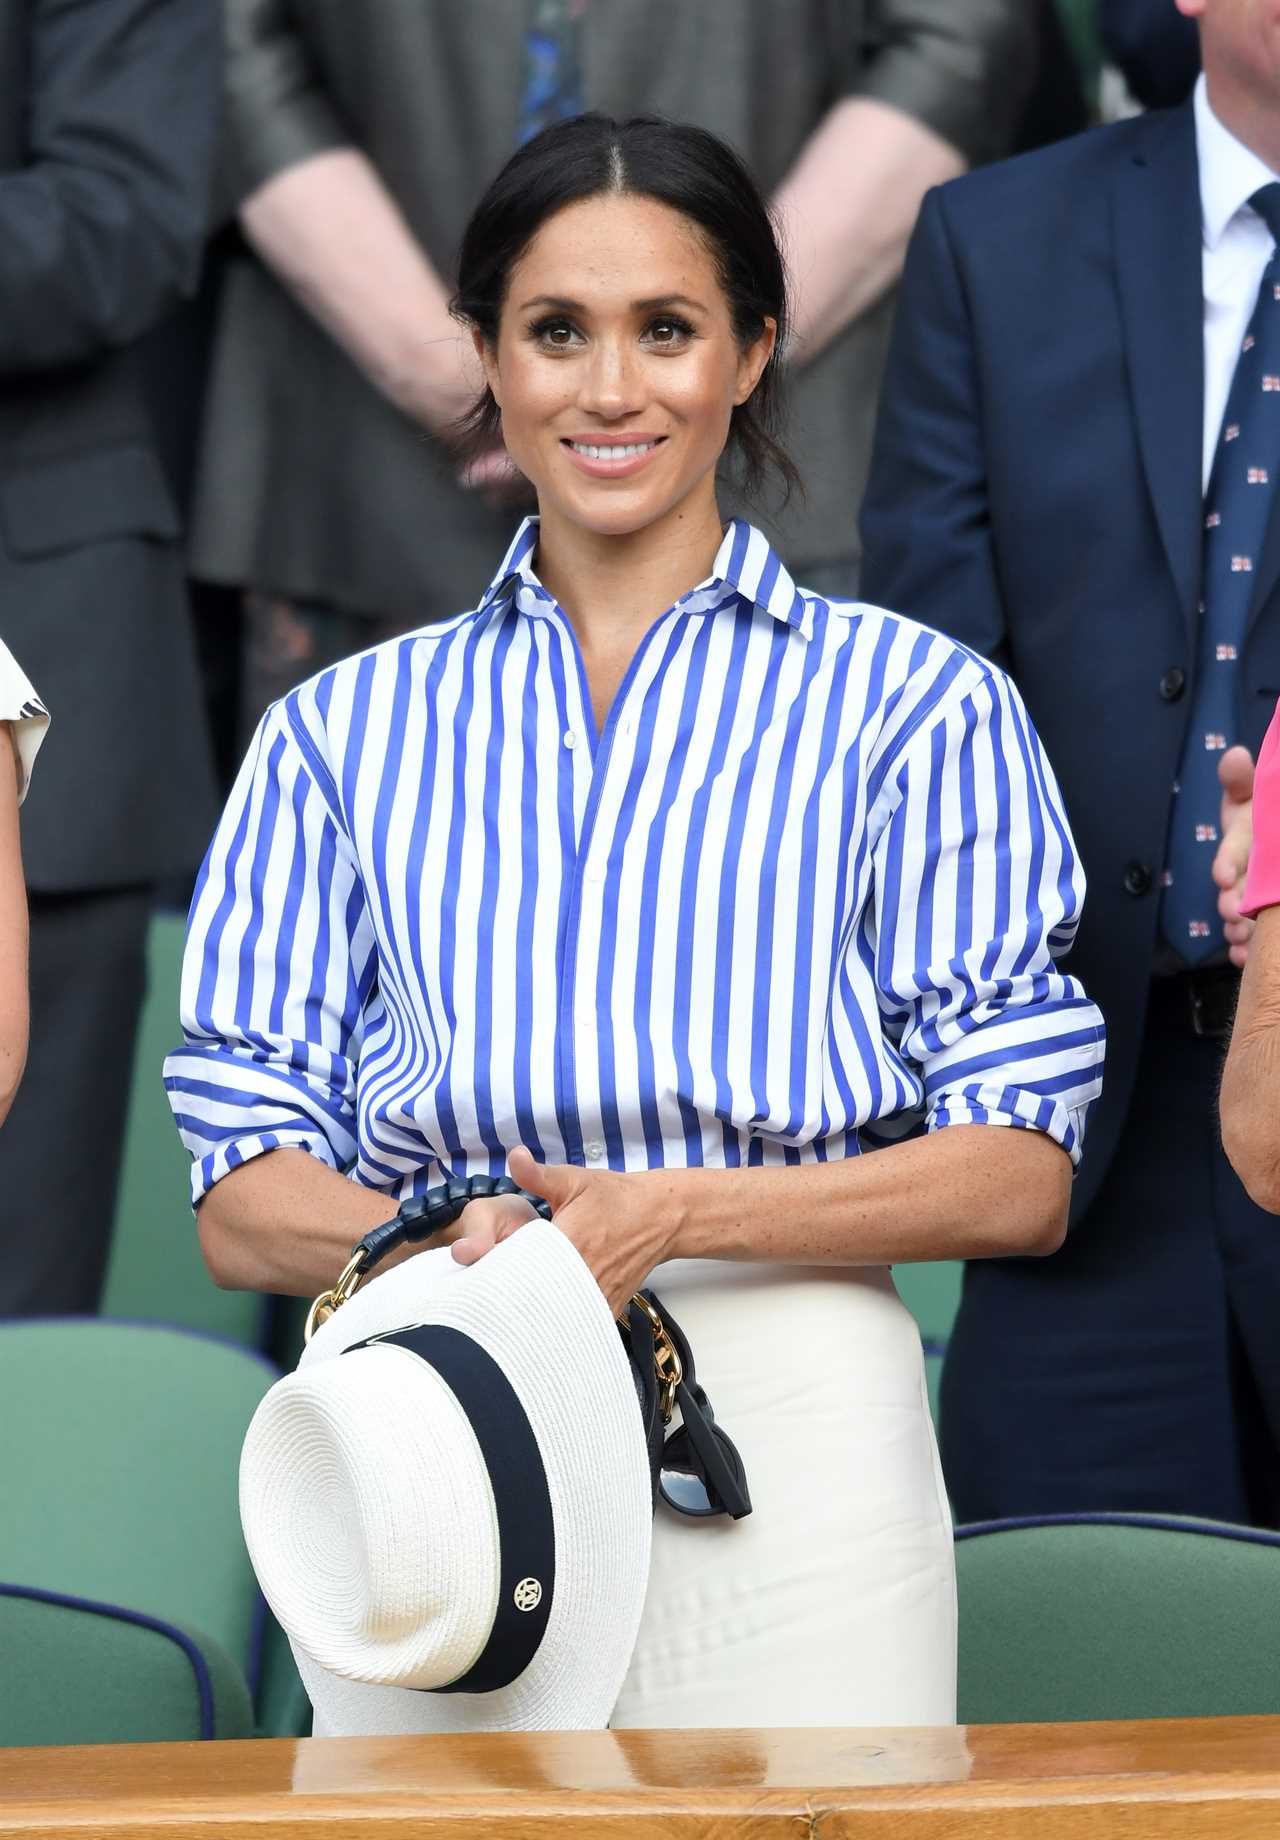 I’m a style whizz and here’s the easy trick that makes you look 5 lbs slimmer in seconds and Meghan Markle swears by it